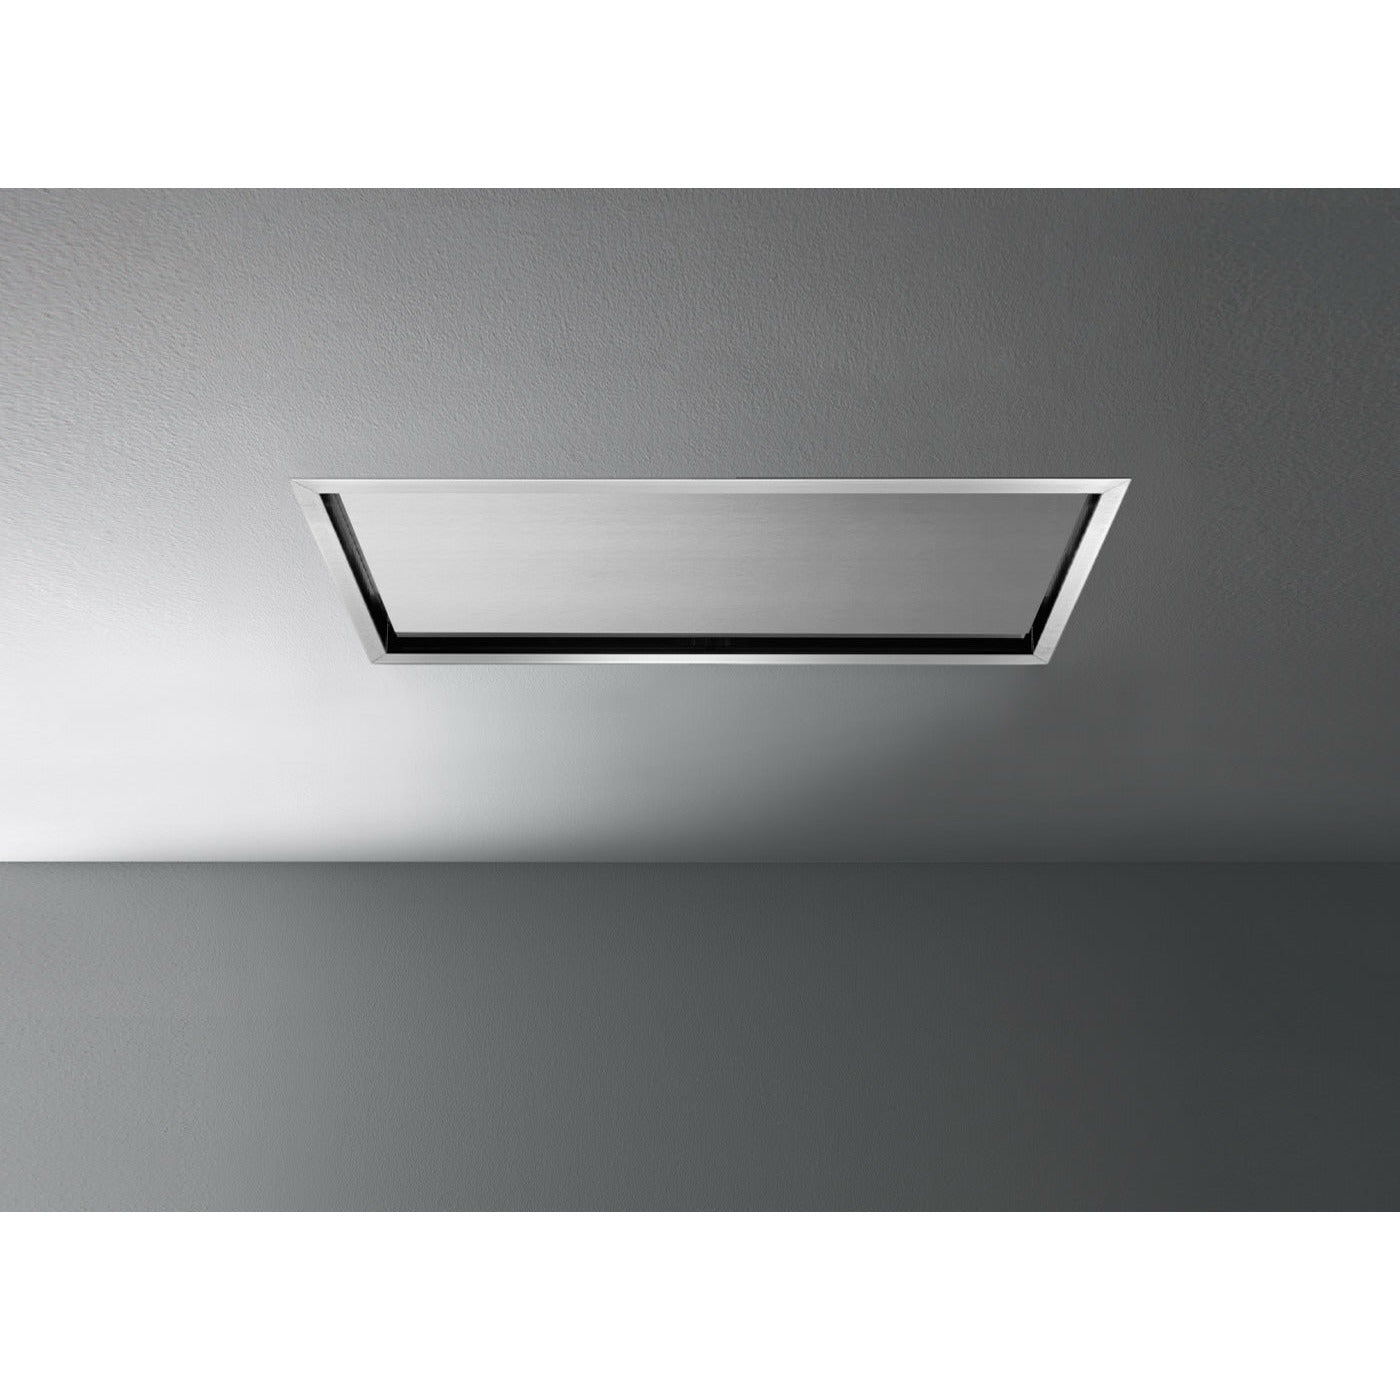 Falmec Nube Ceiling 36" Liner Insert,  with 600 CFM Motor (Motor Sold Separately), Electronic Control, Metallic Grease Filter, Scotch Brite Stainless Steel (AISI 304), Perimeter Suction, and Remote Control Included - FDNUB36C6SS-R